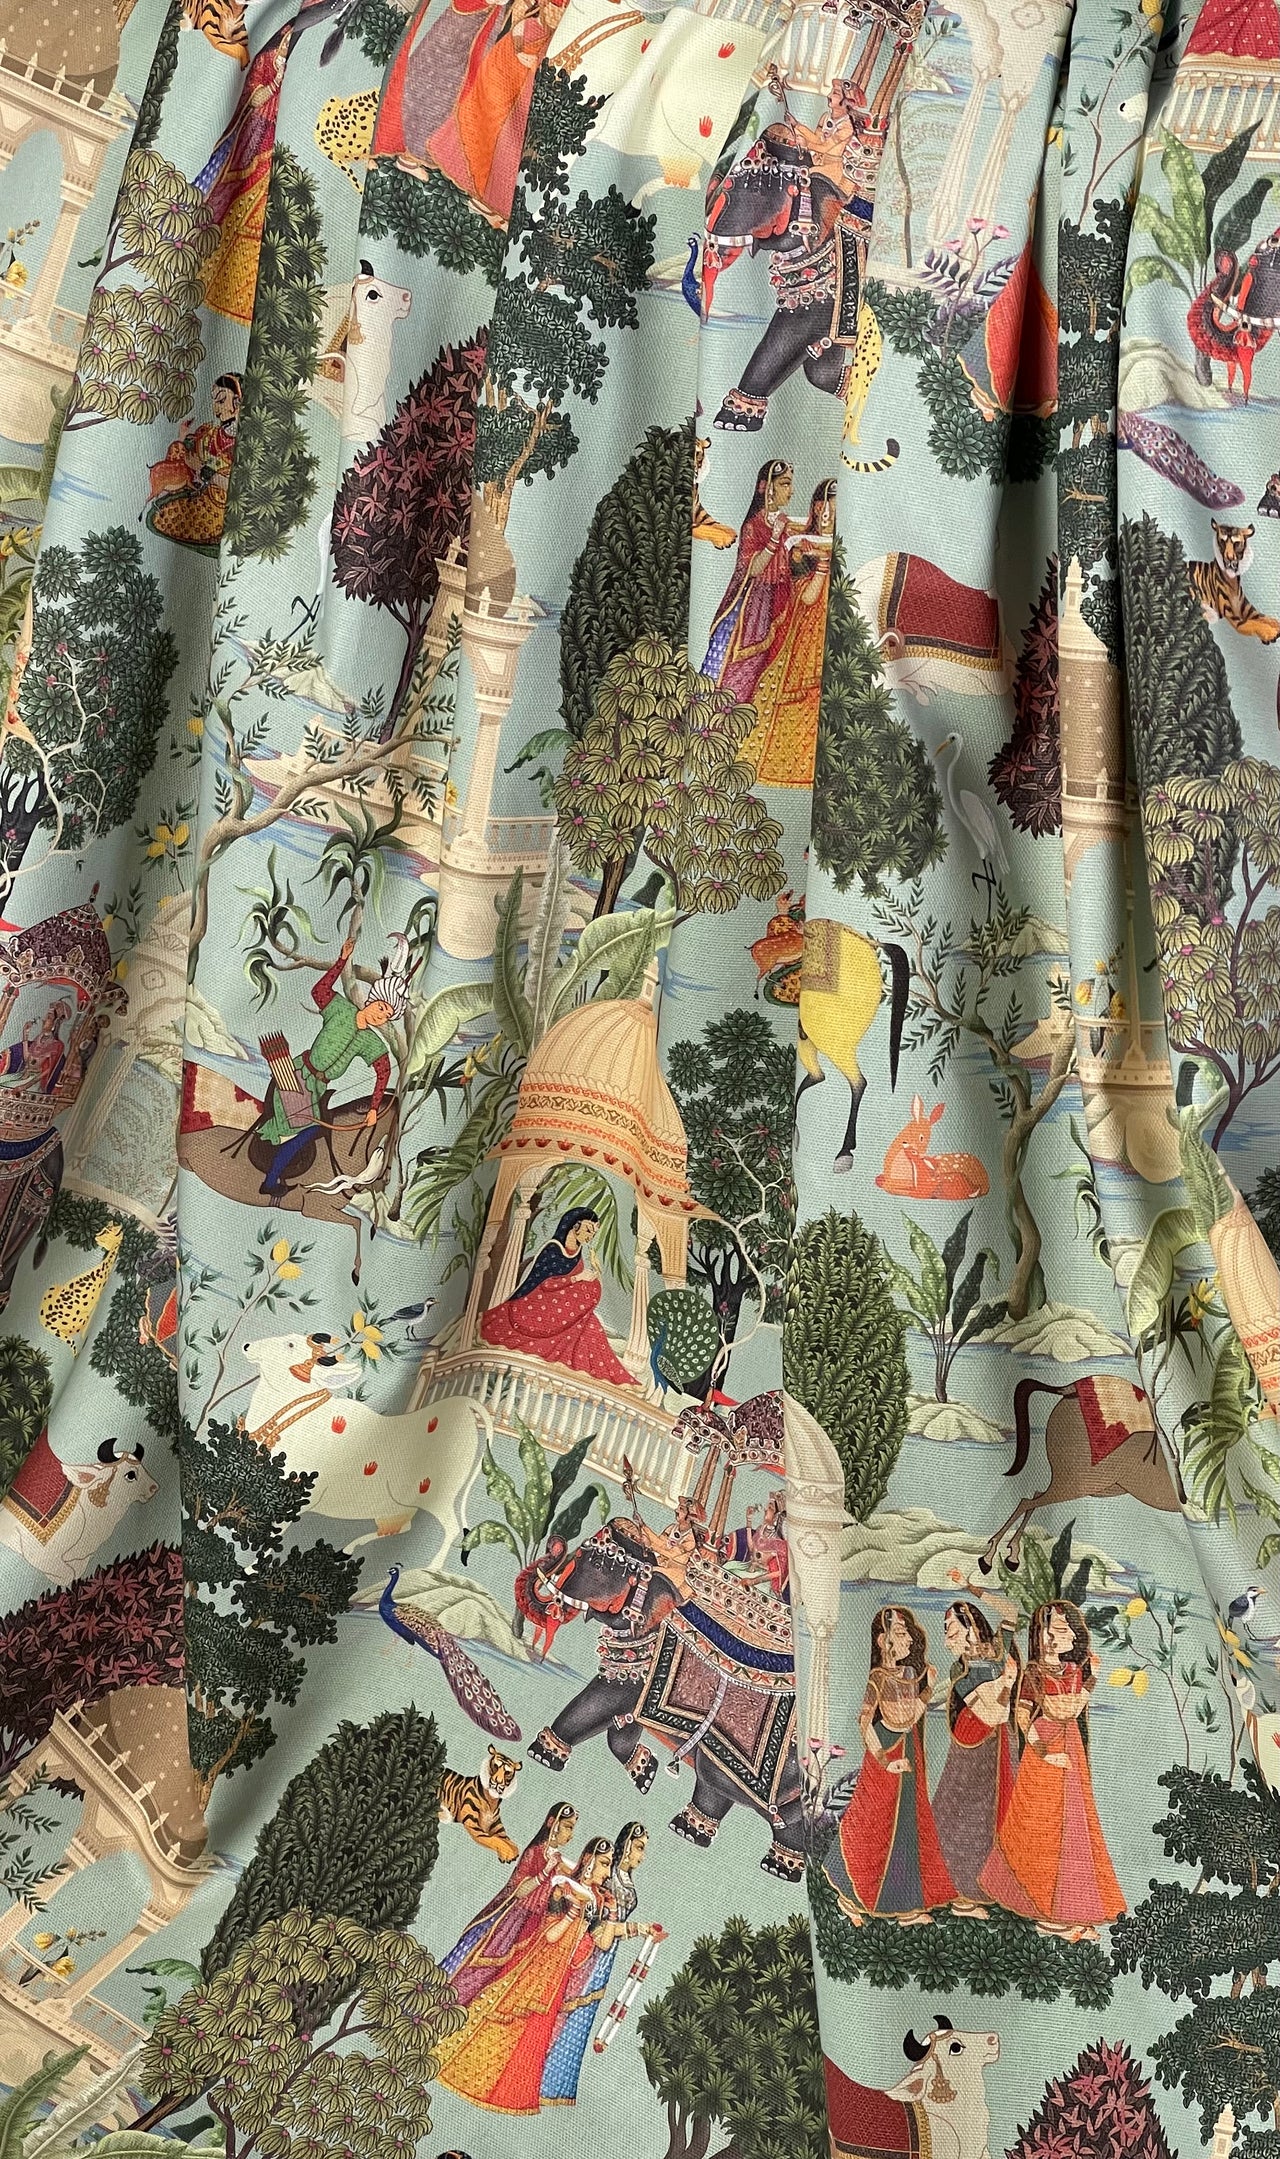 Custom-Made to Measure Roman Blinds - Regalia Pattern on Duck Egg Cotton Fabric with Elephants, Horse, Pagodas, and Trees